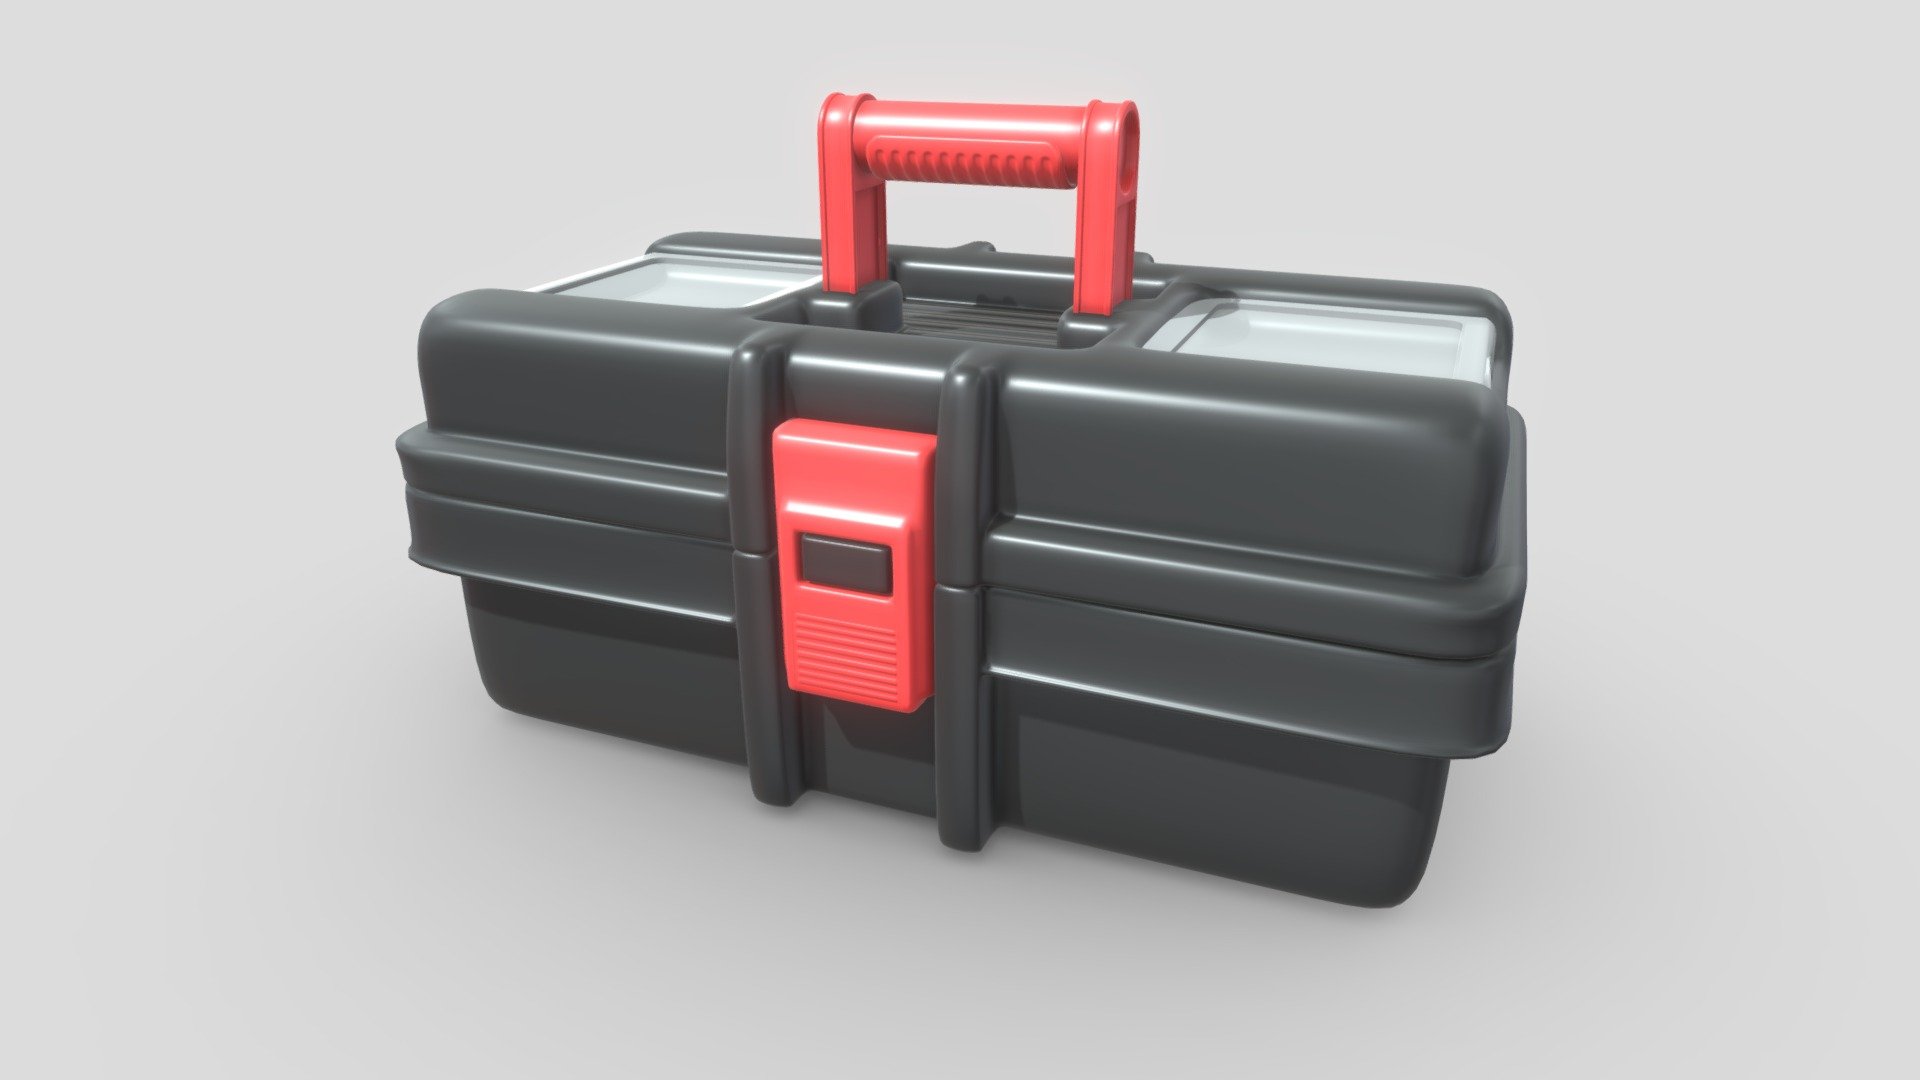 Toolbox 3D model that I made using Blender. Included are two subdivision levels of the body of the model. One is high poly and the other has a reduced number of polygons. Both models have their own set of PBR textures and make use of a normal map to add extra detail.

Features:


High poly model shown in model viewer
Includes GLTF file type instructions
Models use the metalness workflow and 4K PBR textures in PNG format
Models have been manually UV unwrapped
Models Use normal maps to add extra detail to the models
Blend file includes pre-applied textures as well as camera and lighting setups
Lighting provided by included HDRi map downloaded from HDRi Haven
Models have been exported in 4 file formats (FBX, OBJ, GLTF/GLB, DAE/Collada)

Included Textures:


AO, Diffuse (Alpha), Roughness, Gloss, Normal
UVLayout

The source file is uploaded in FBX format and is used for demonstration. In the additional file you will find all model exports and the textures that go along with them 3d model